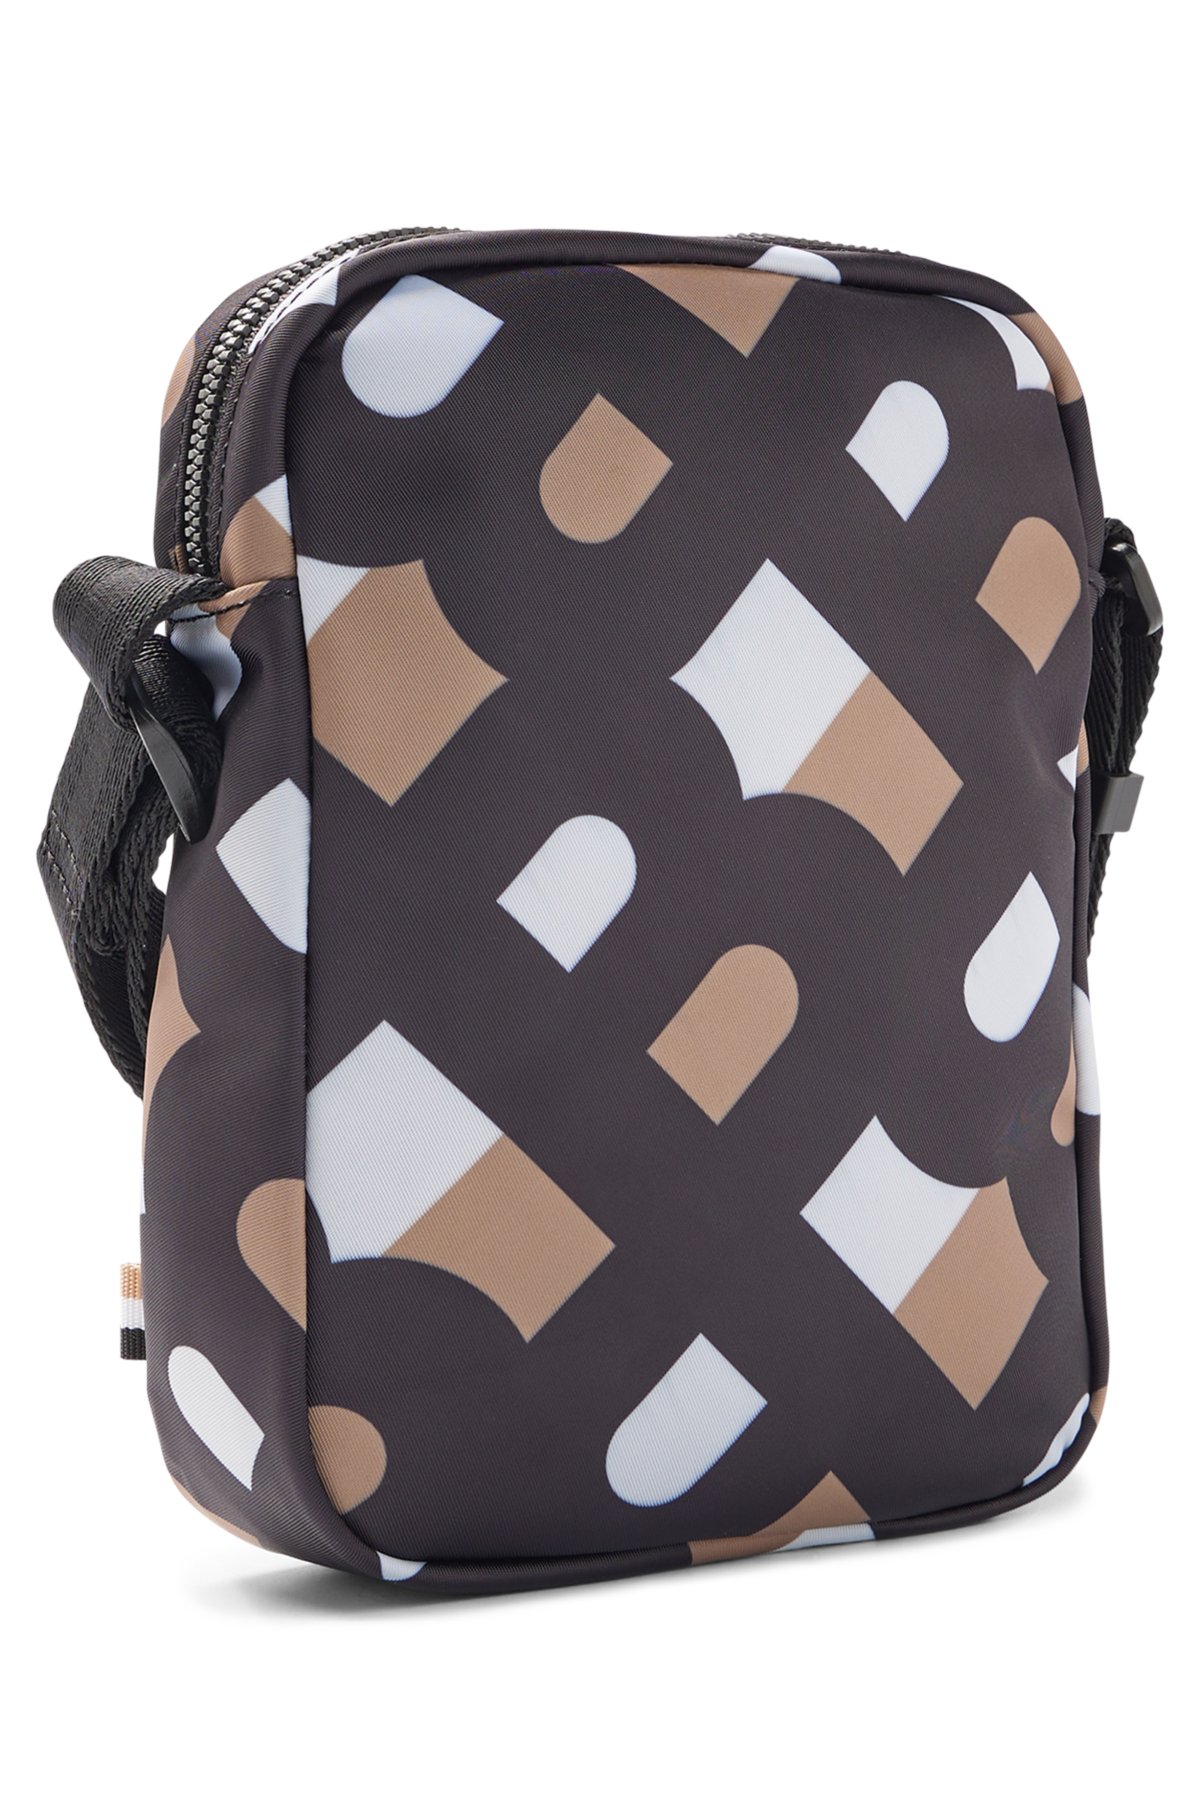 BOSS - Monogram-print backpack in recycled material with adjustable straps